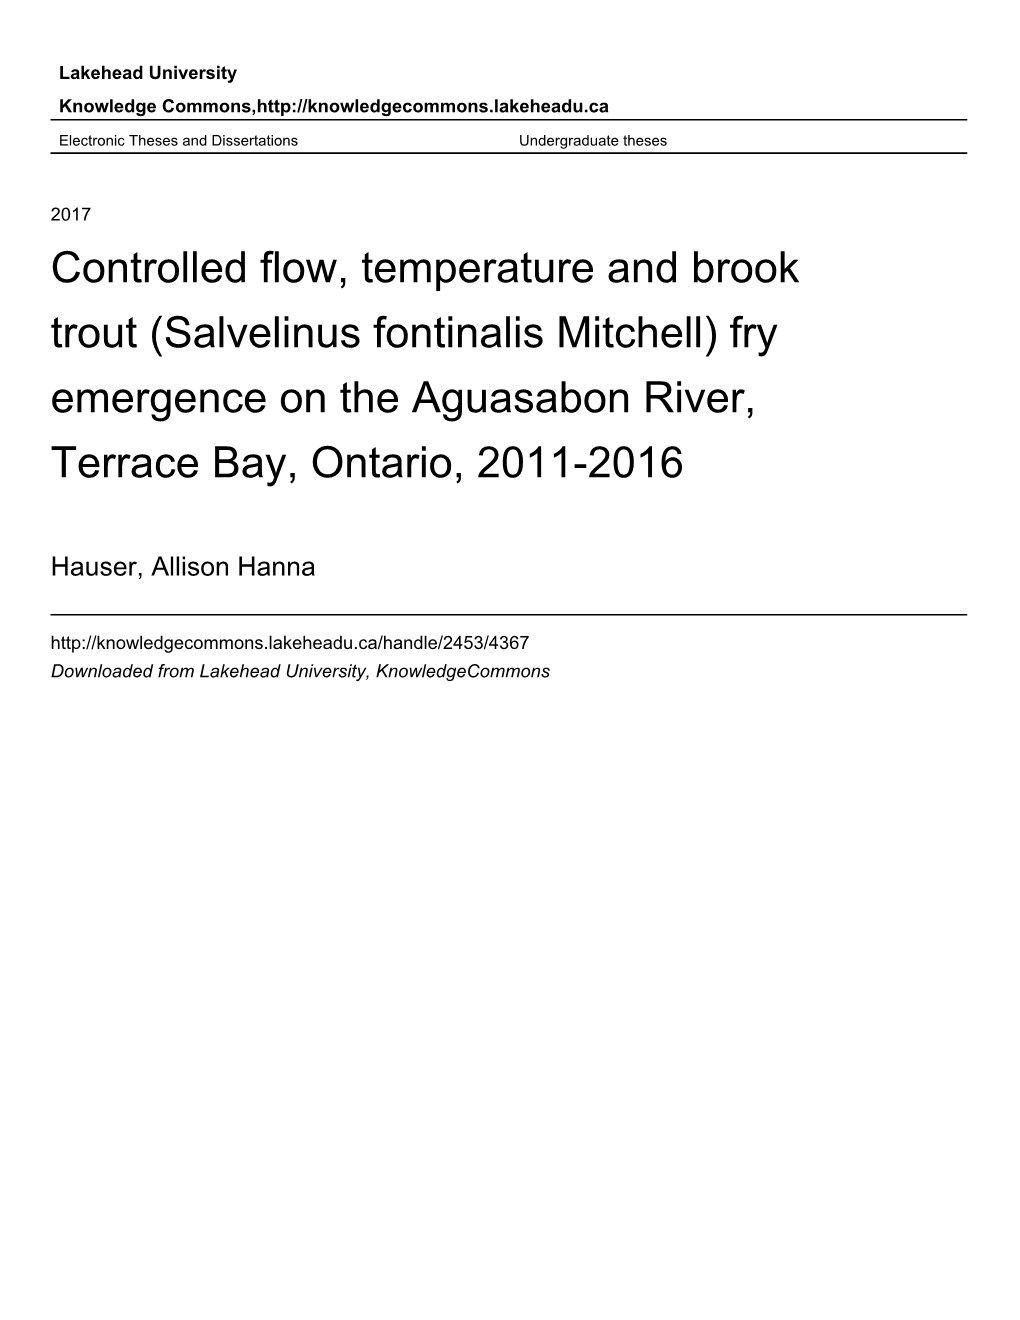 Controlled Flow, Temperature and Brook Trout (Salvelinus Fontinalis Mitchell) Fry Emergence on the Aguasabon River, Terrace Bay, Ontario, 2011-2016